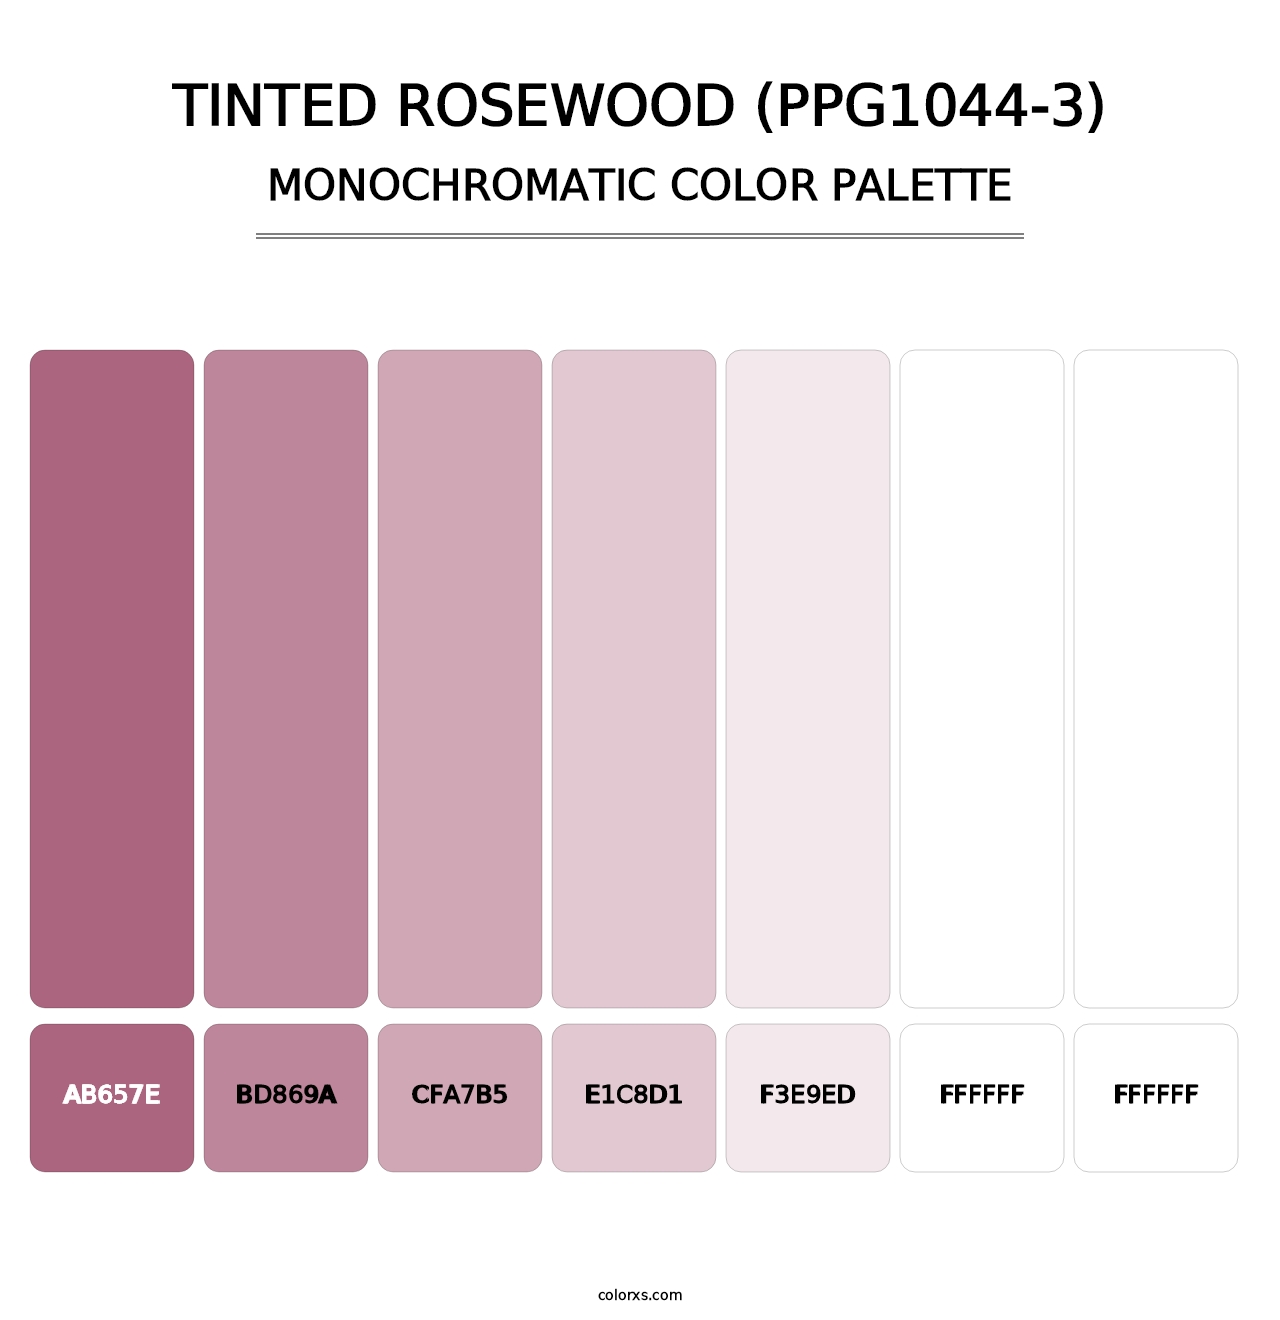 Tinted Rosewood (PPG1044-3) - Monochromatic Color Palette